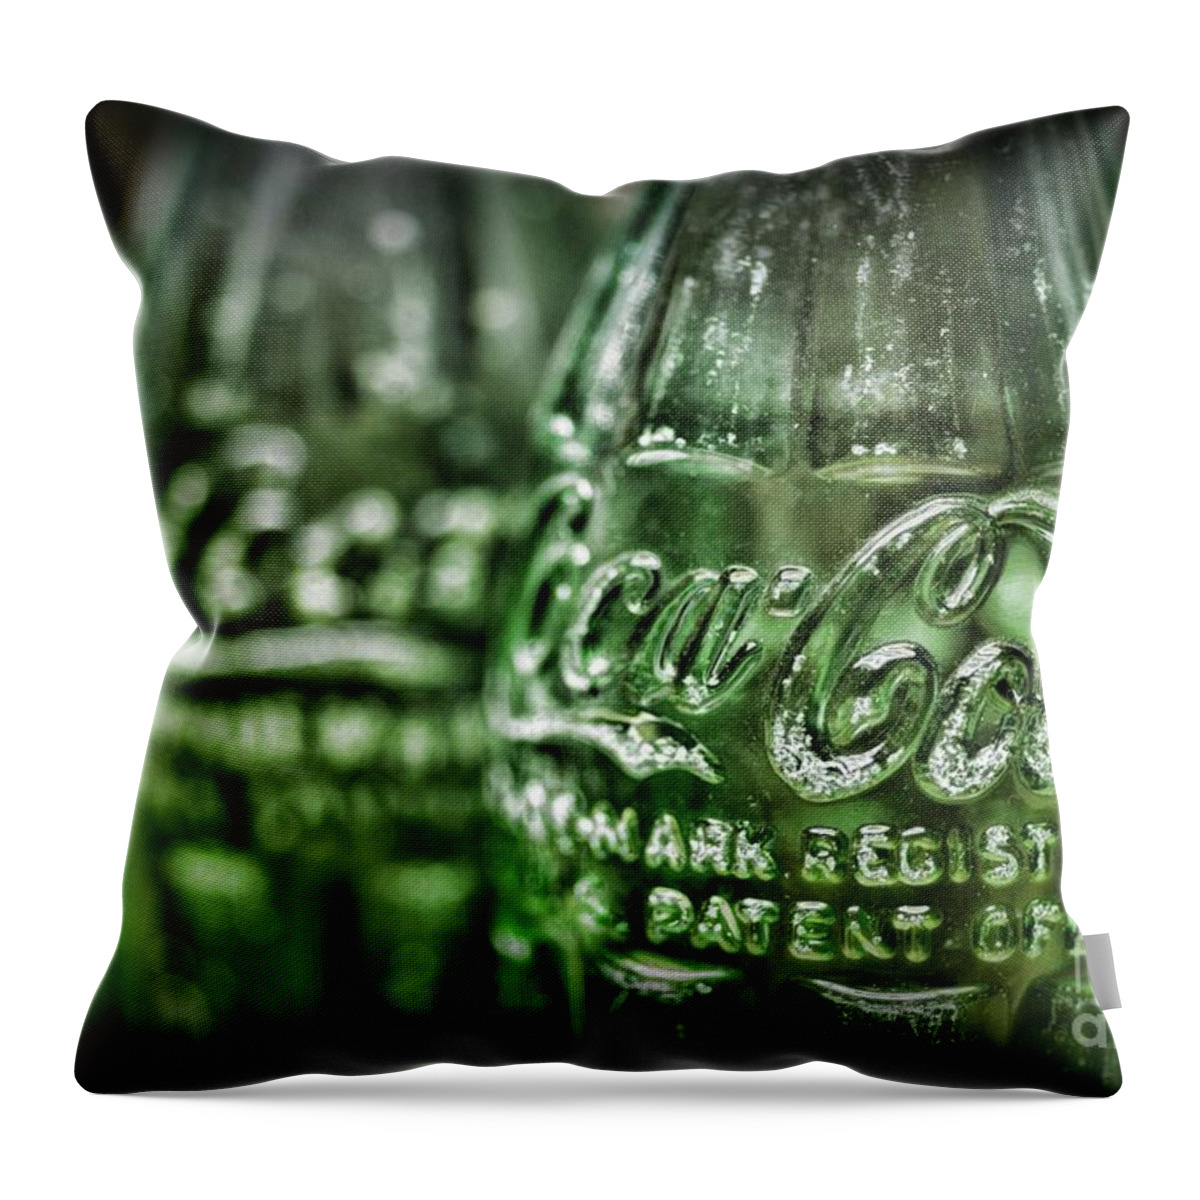 Coke Throw Pillow featuring the photograph Vintage Coke Bottle Close Up by Paul Ward